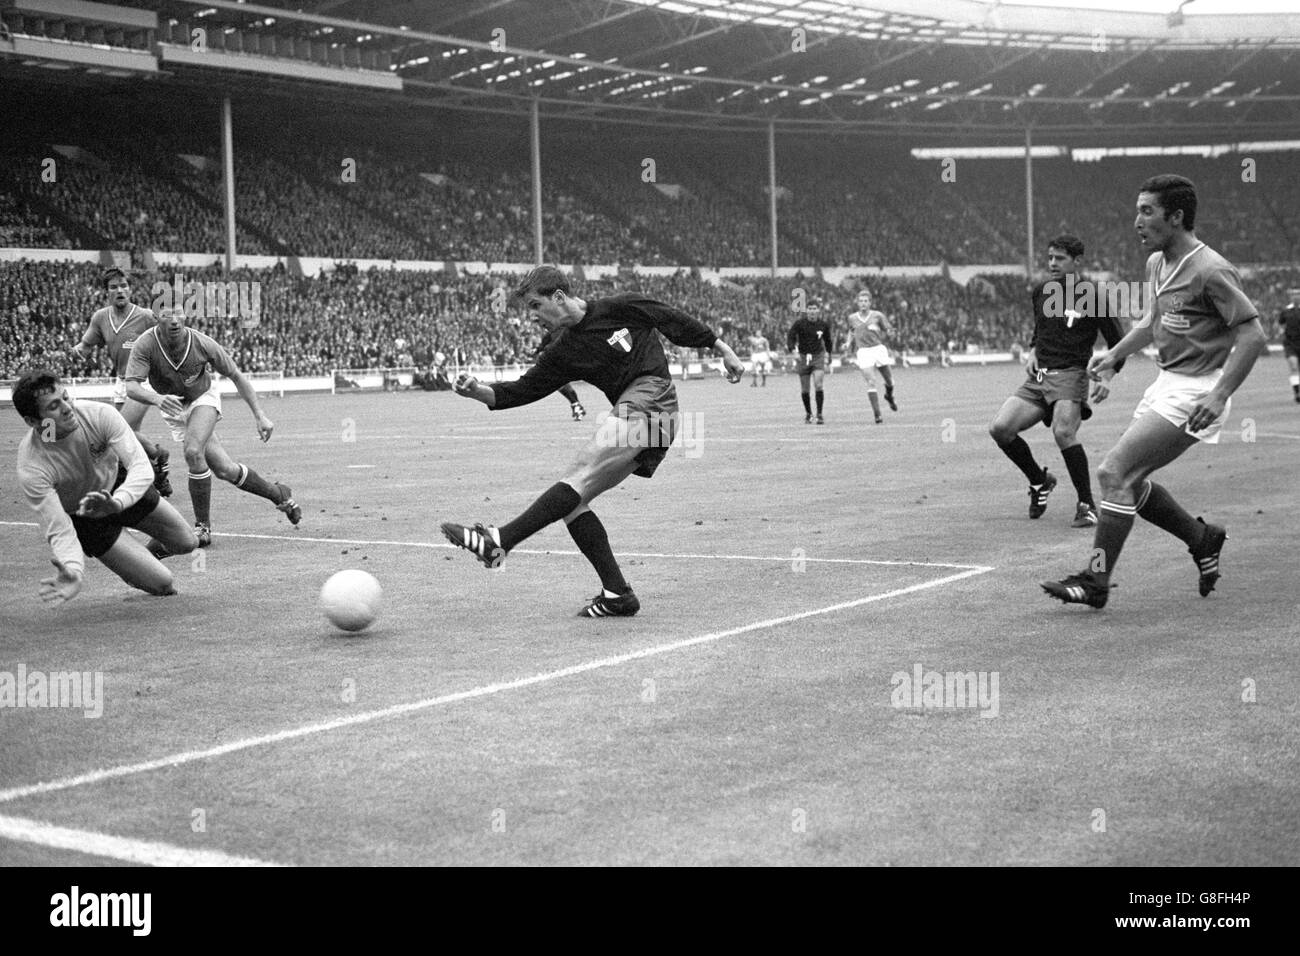 Soccer - World Cup England 1966 - Group One - France v Mexico - Wembley Stadium Stock Photo